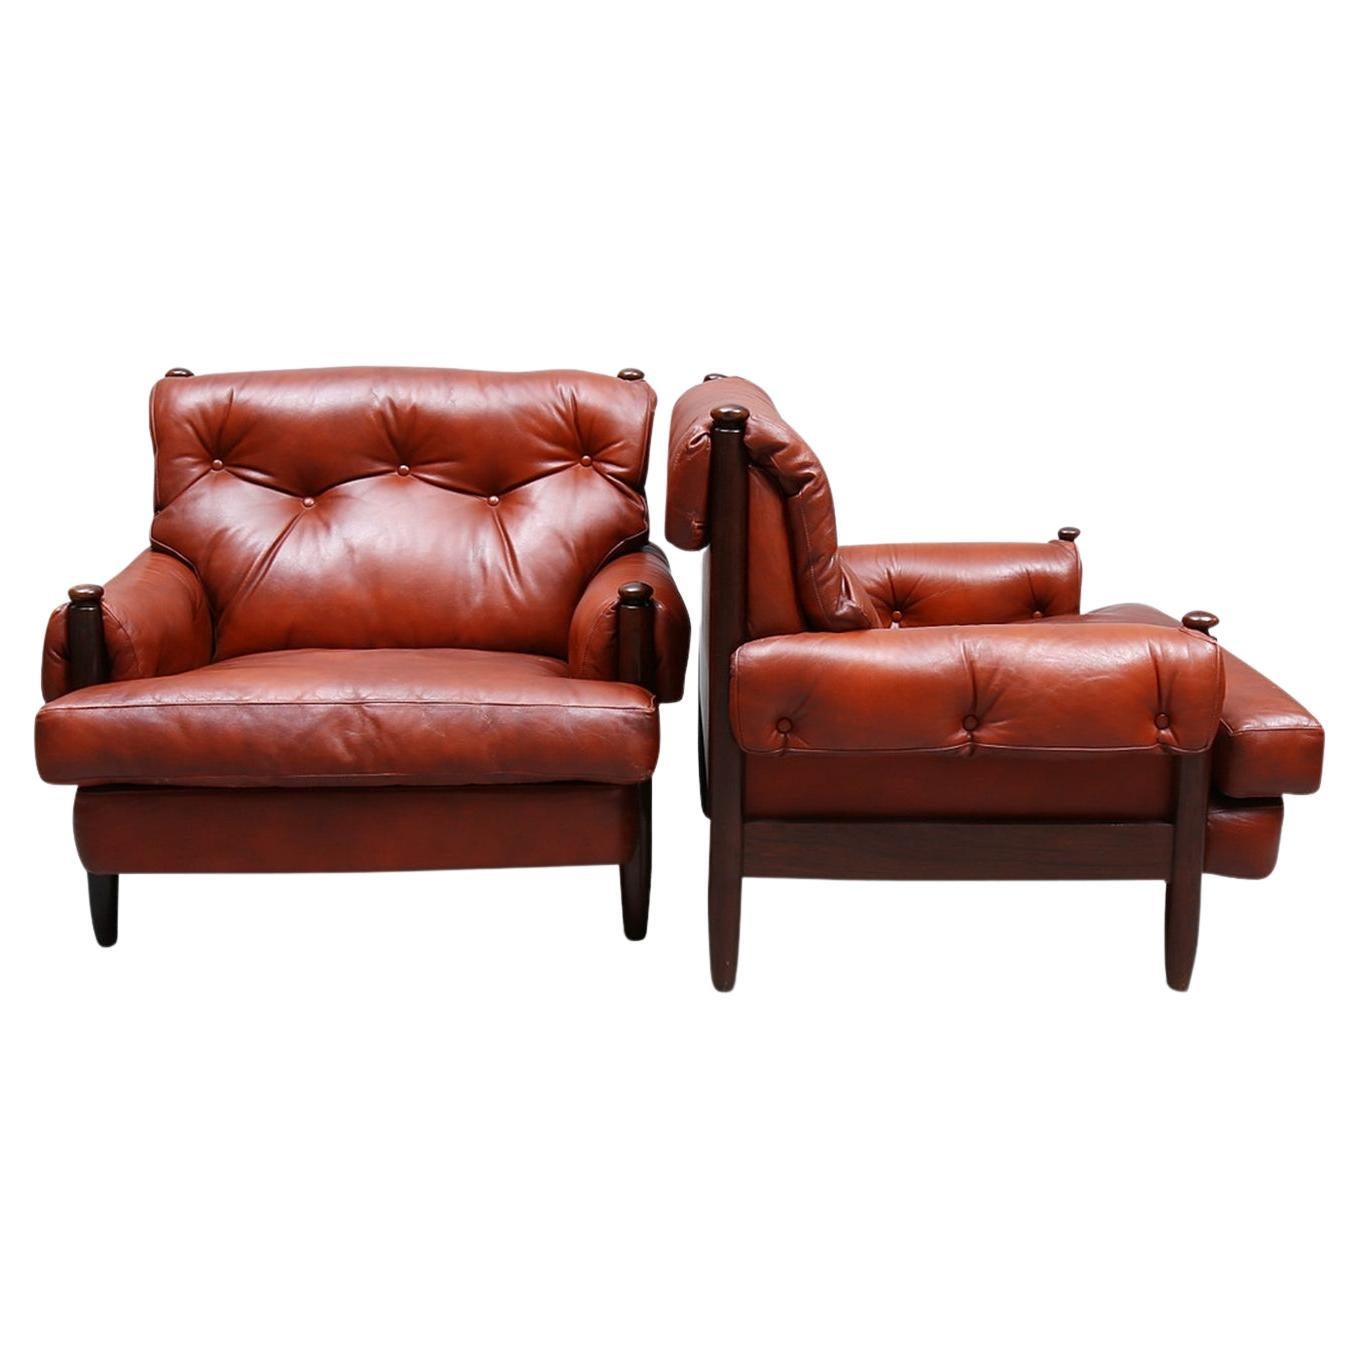 Pair of Rosewood + Rust Leather Lounge Chairs